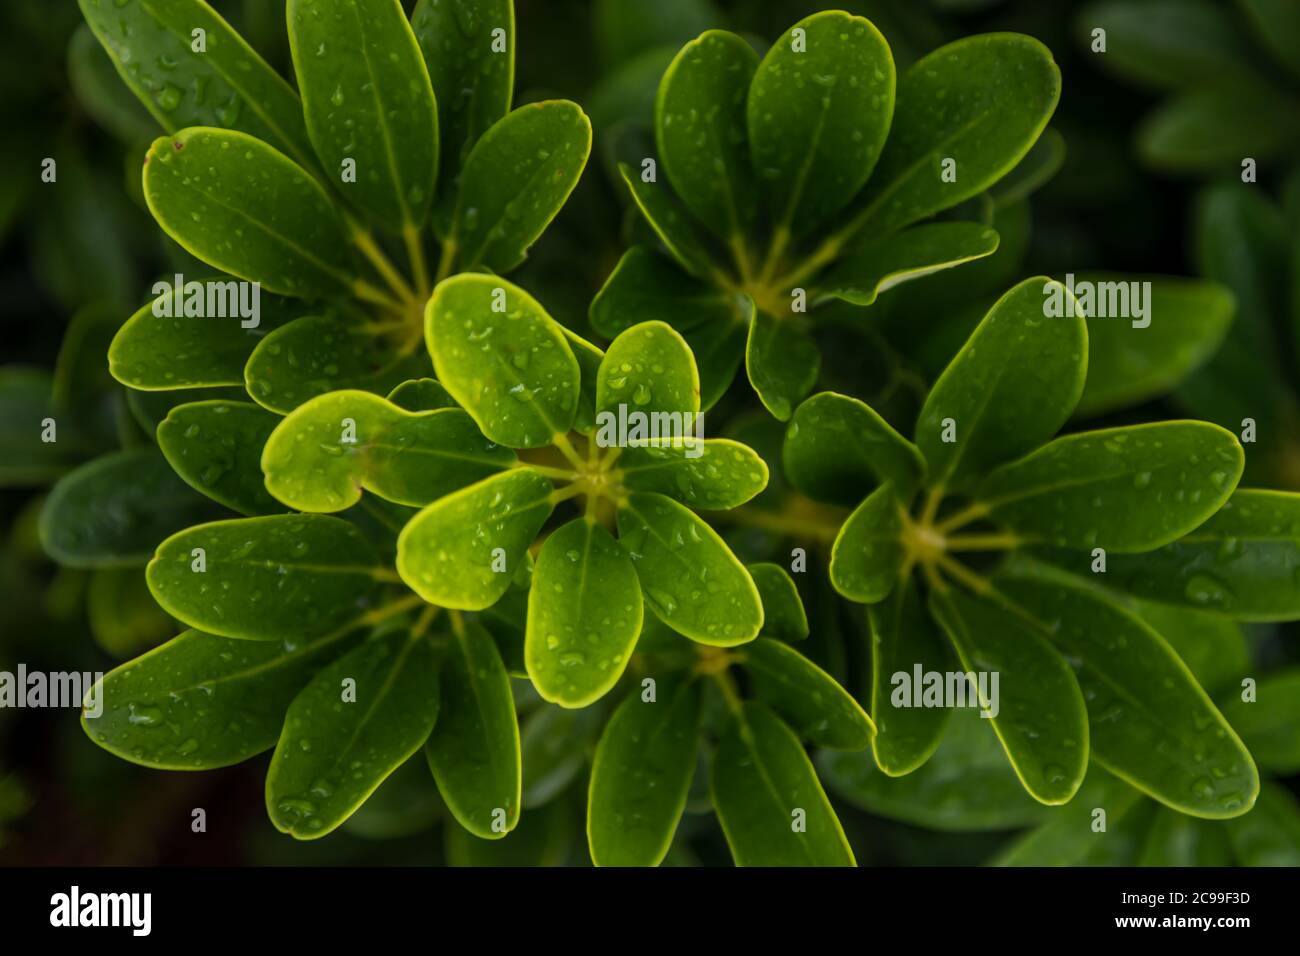 Water drops on Schefflera actinophylla leaves beautifully blooming in garden. No focus, specifically. Stock Photo